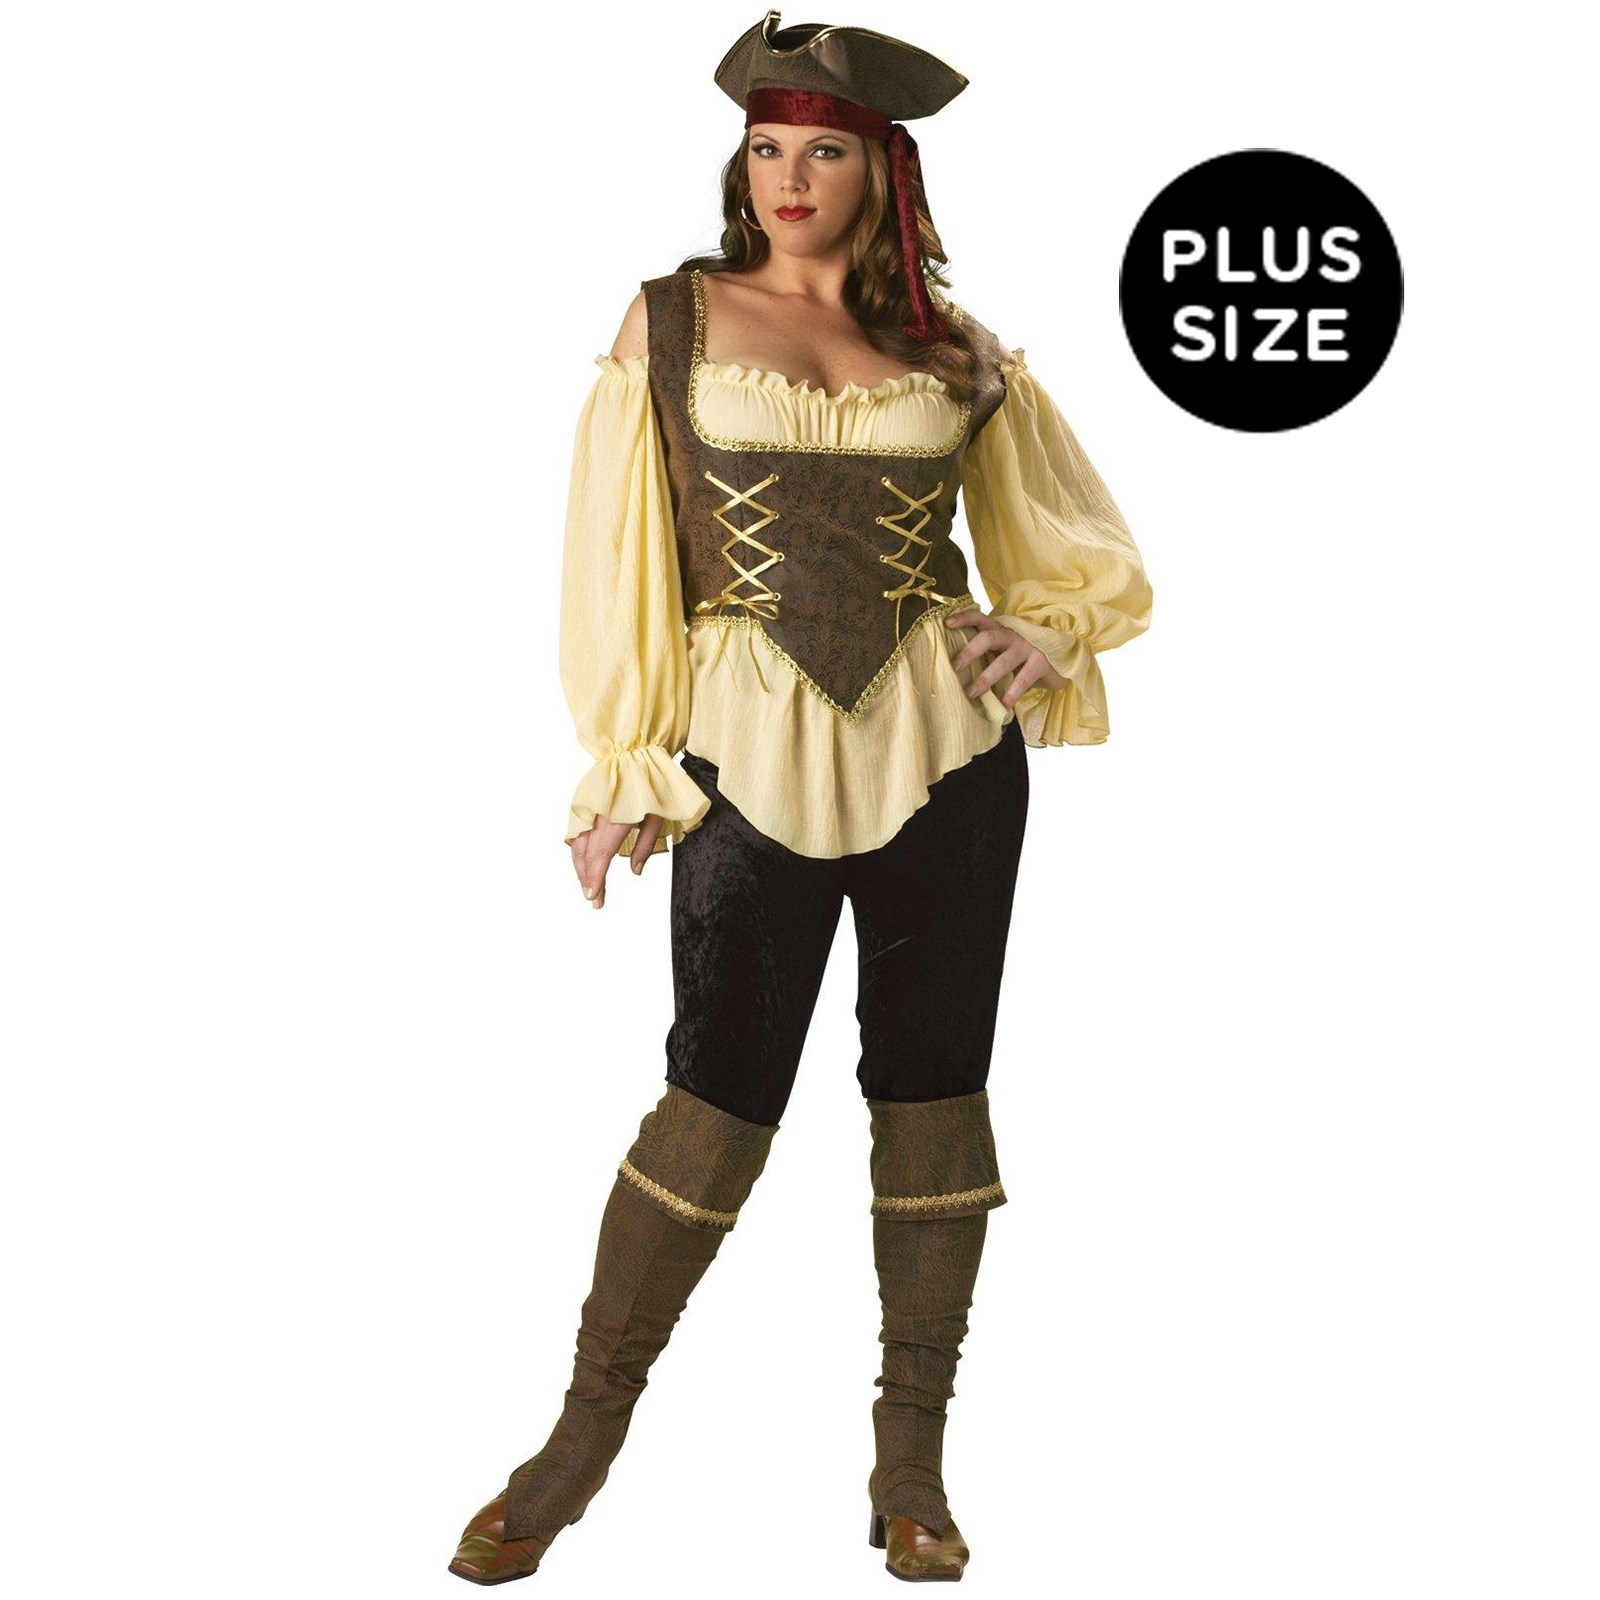 Rustic Pirate Lady Elite Collection Adult Plus Costume